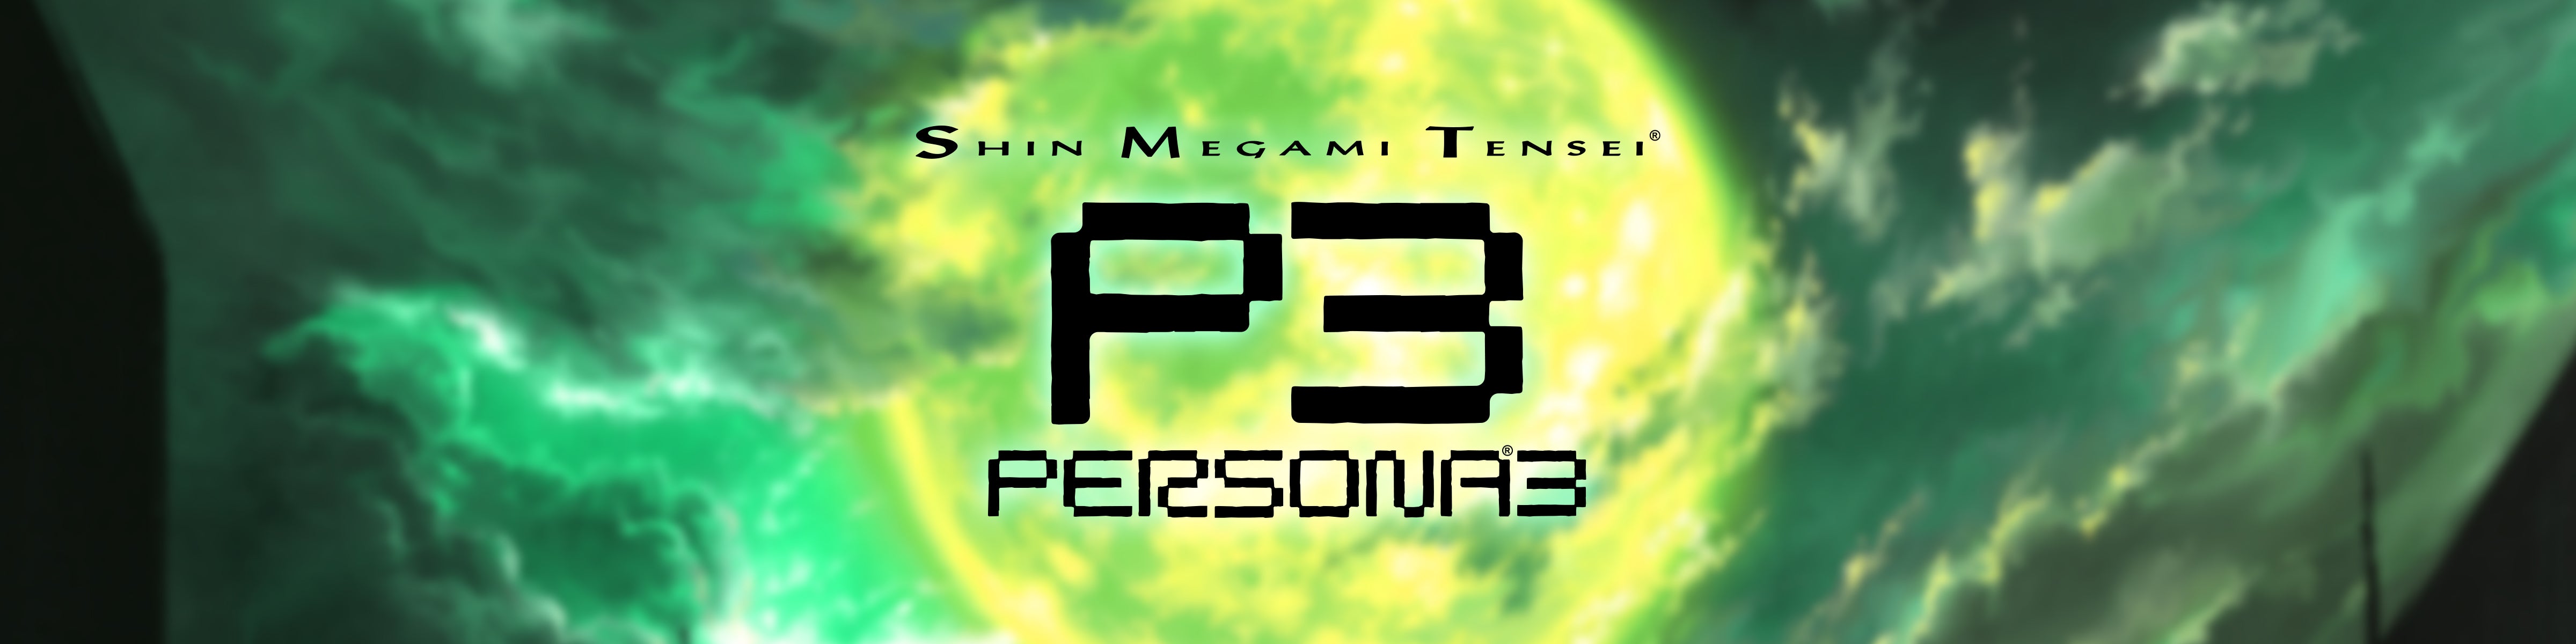 The Officially Licensed Persona 3 Merchandise Collection